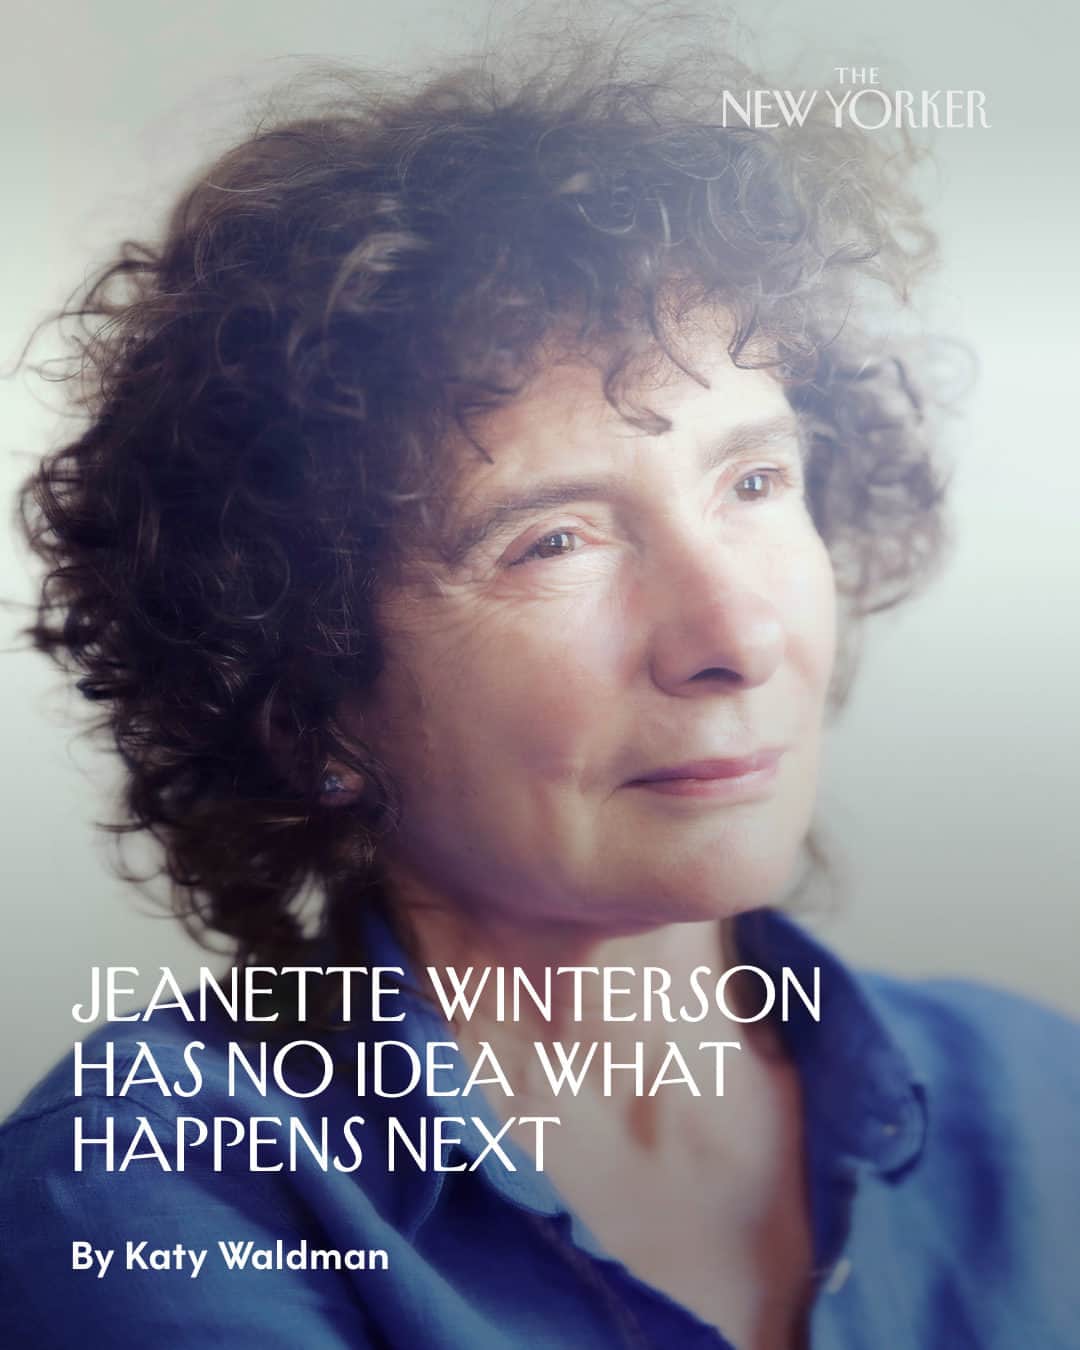 The New Yorkerのインスタグラム：「Jeanette Winterson burst onto the literary scene in 1985 with the publication of her début novel, “Oranges Are Not the Only Fruit,” a fictional “retelling” of her childhood in a working-class Pentecostal family. Upon discovering that her daughter was sleeping with a woman, Winterson’s mother cast her out of the house at 16. Winterson supported herself as a mortician’s assistant, ice-cream-van driver, and aide in a psychiatric hospital while studying for her A-levels. After earning a degree in English from St. Catherine’s College, in Oxford, she moved to London, where she took on more odd jobs. “Oranges,” which was followed by two experimental novels, made her a literary celebrity, a nervy, young, female alternative to Ian McEwan and Martin Amis. Critics praised her pyrotechnic language, her lyrical attention to desire and emotion, her imagination, her exuberance. At times, Winterson seemed ill-equipped to handle her meteoric rise. Asked by the press to choose a “book of the year,” she chose her own. Asked to name her favorite living author, she named herself.  In recent years, Winterson has published a memoir revisiting her childhood, “Why Be Happy When You Could Be Normal?,” and her latest work, “Night Side of the River,” a collection of ghost stories, is out in time for Halloween. Tap the link in our bio to read a new interview, on breaking rules, pursuing happiness, and deconstructing ghosts. Photograph by Kate Peters / Redux.」